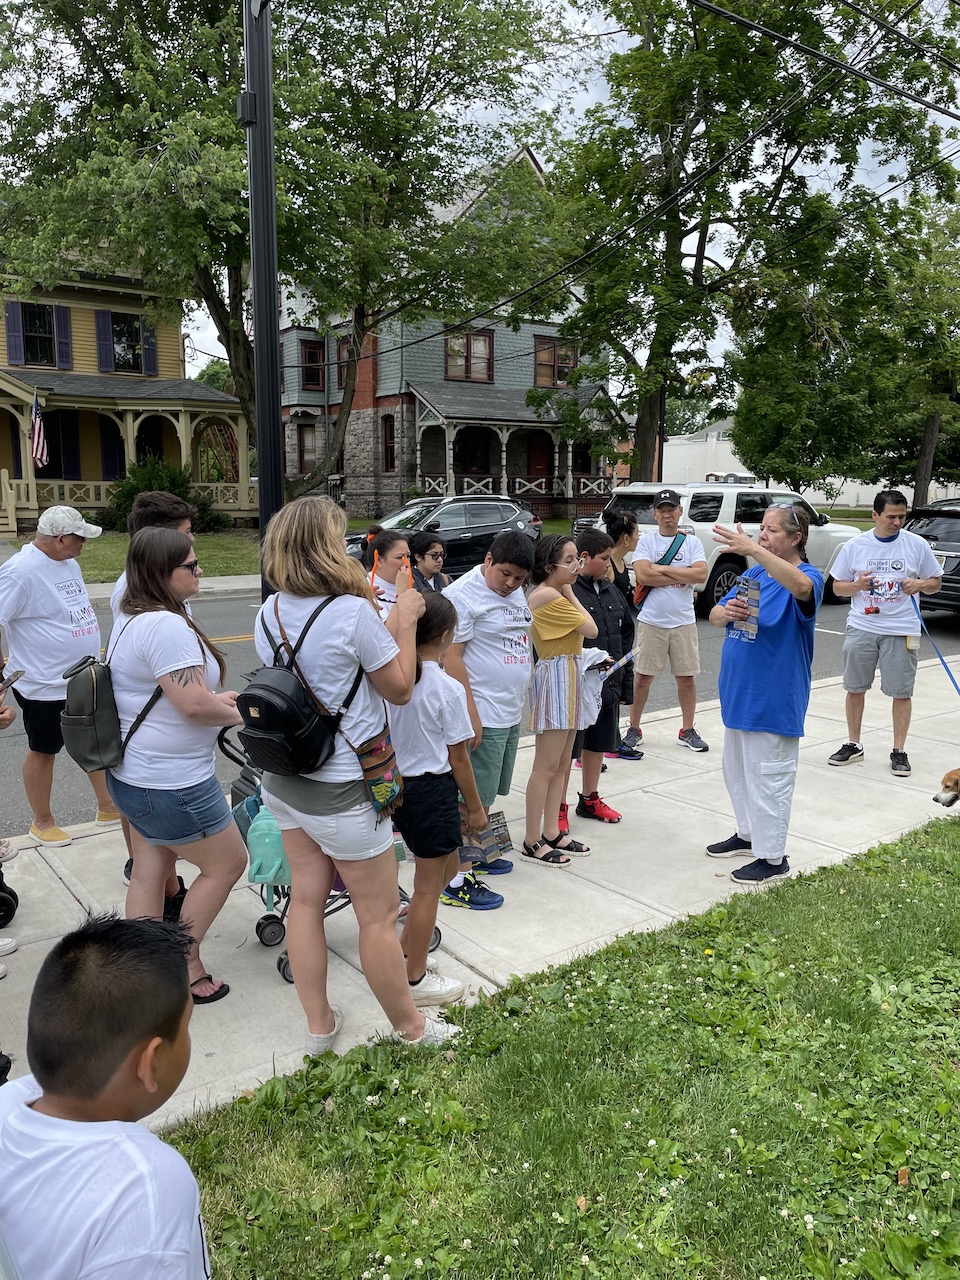 The event was kicked off by a walking tour of Flemington.